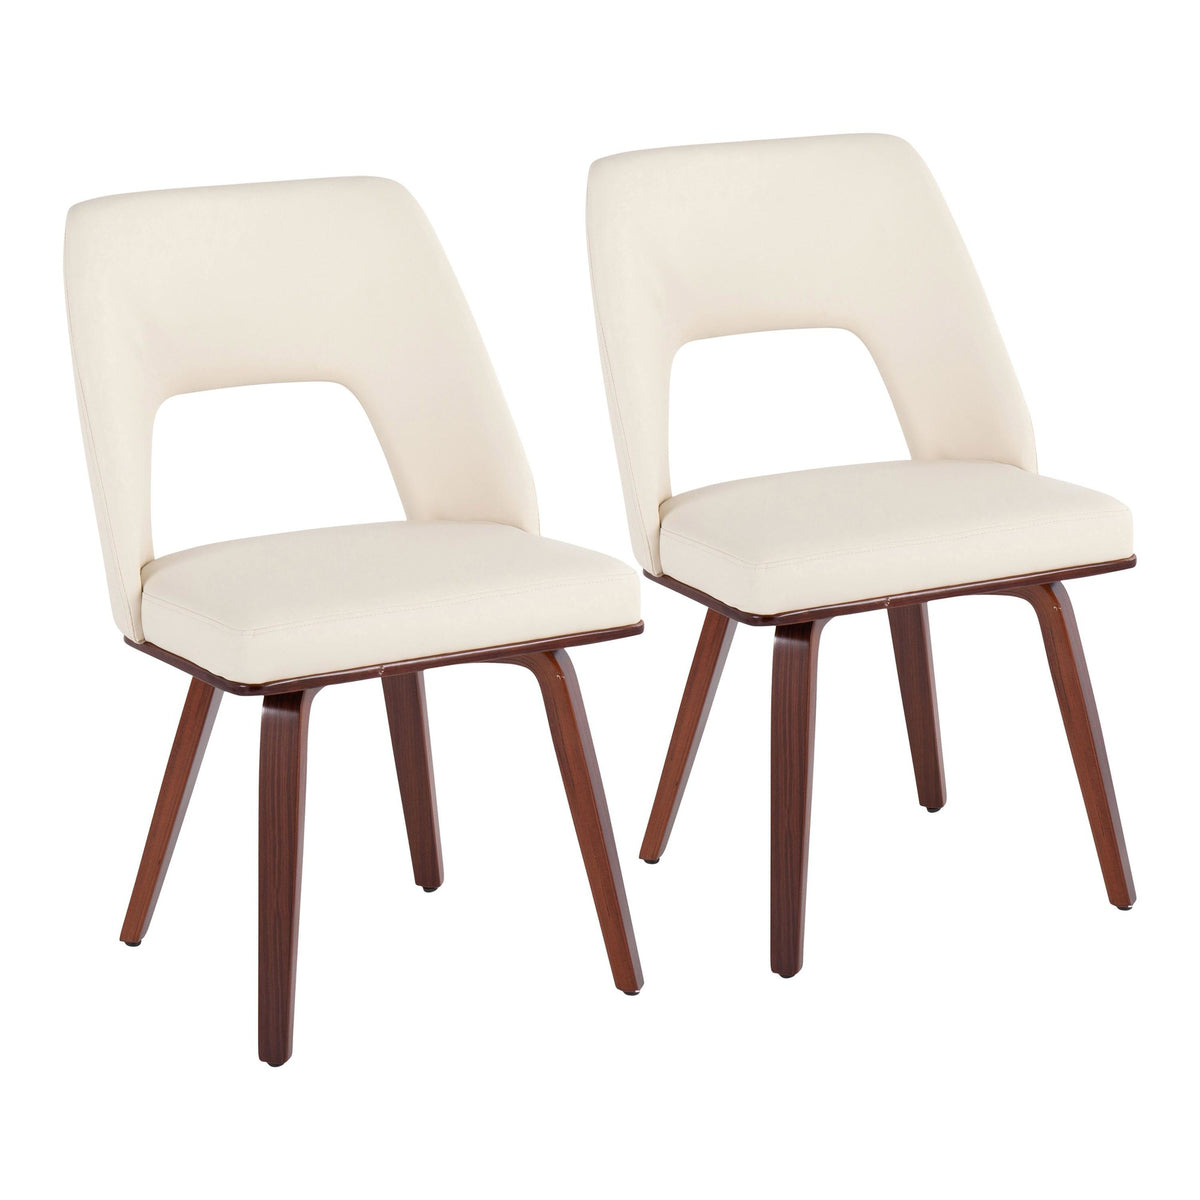 LUMISOURCE TRIAD UPHOLSTERED CHAIR - SET OF 2